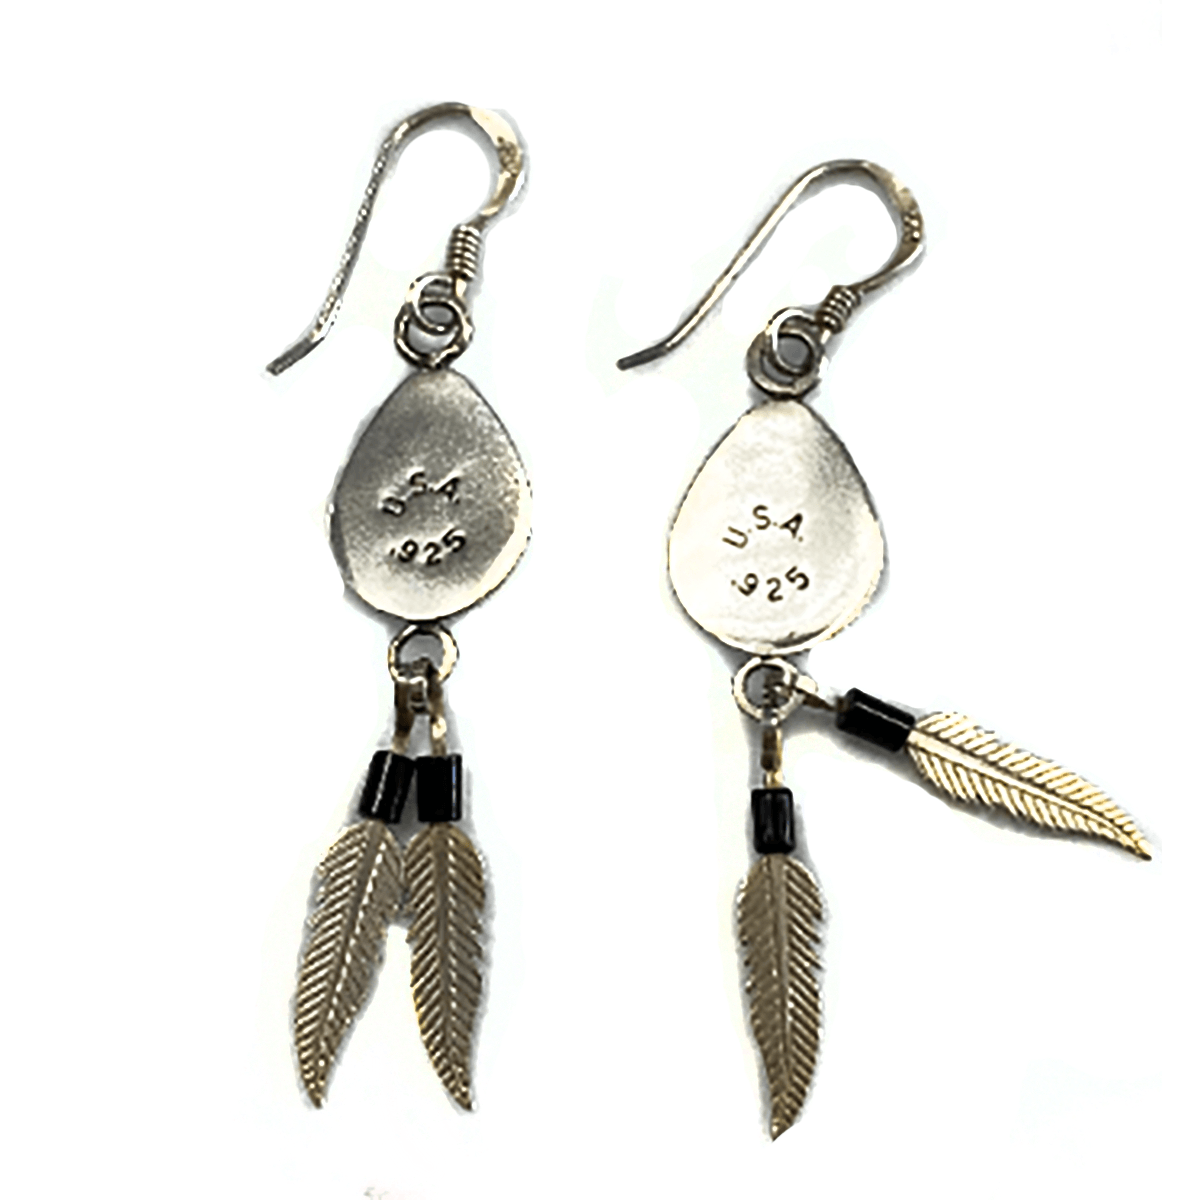 Fine silver peacock feather earrings on hand formed sterling silver wires